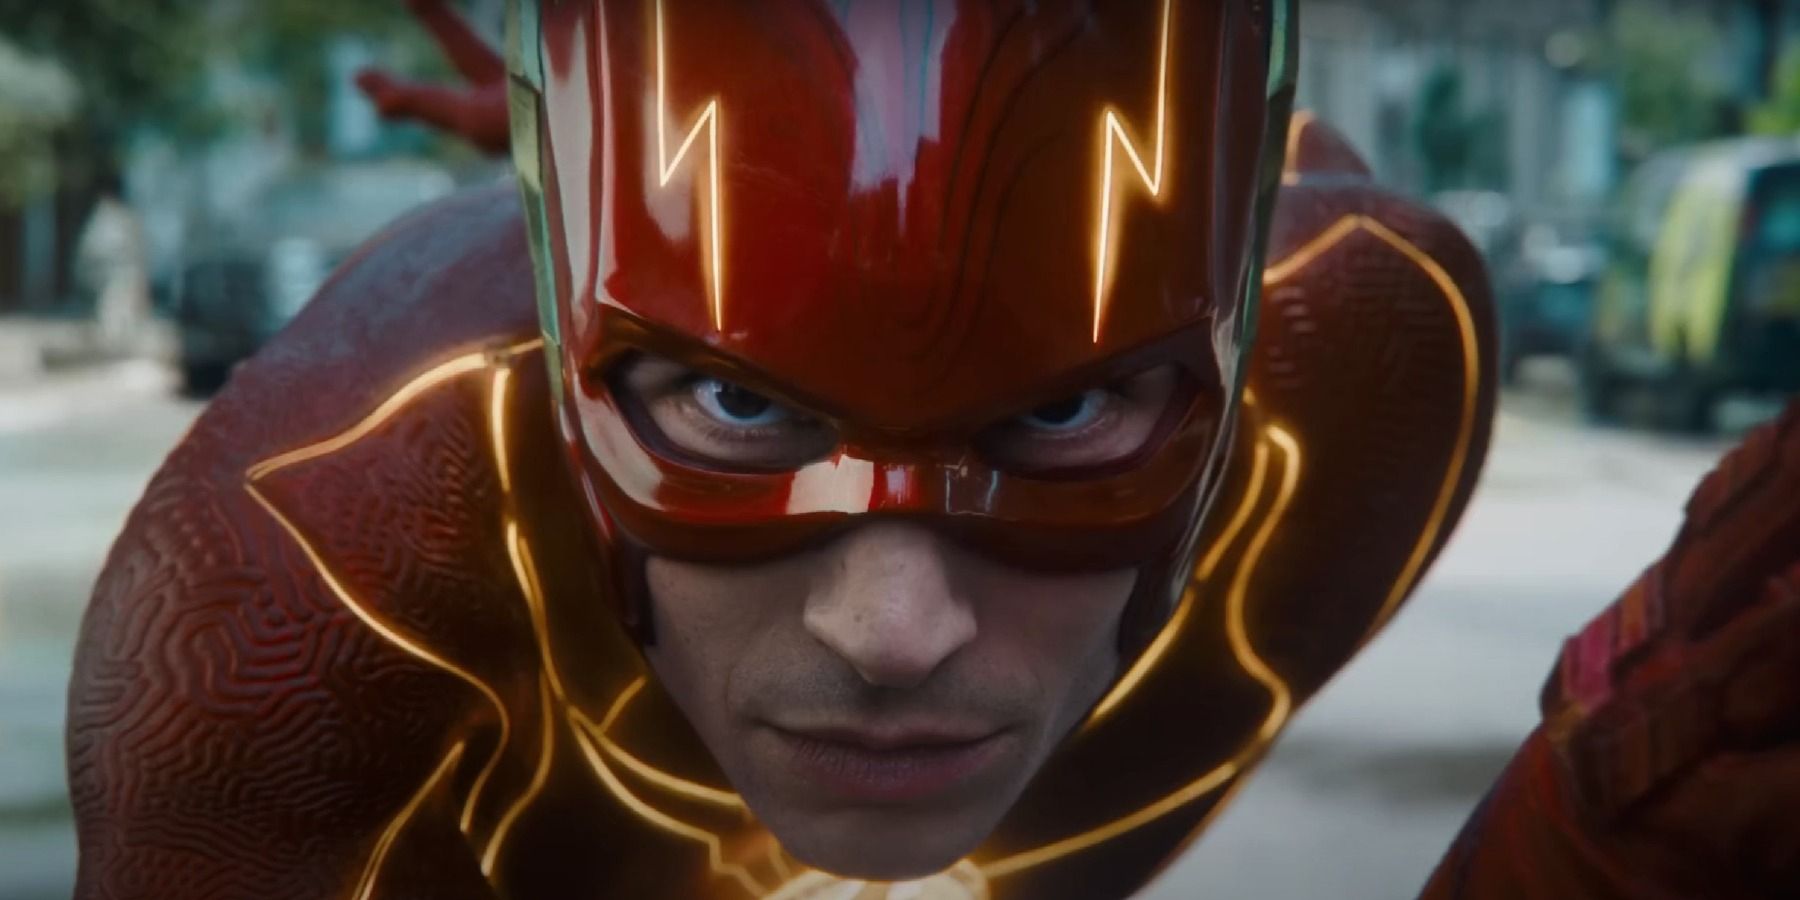 Ezra Miller as Barry Allen in costume close-up in The Flash trailer